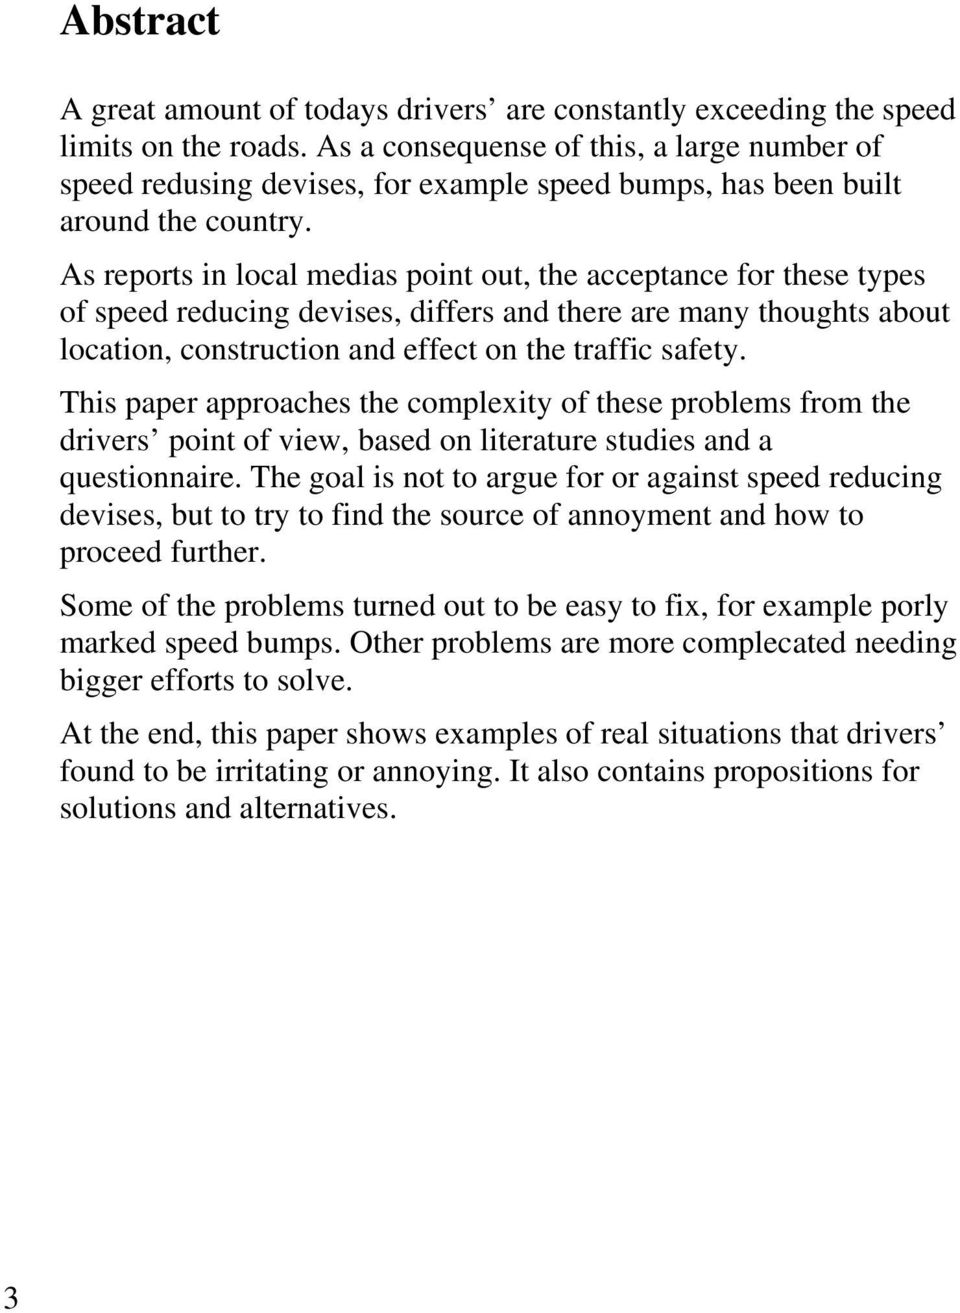 As reports in local medias point out, the acceptance for these types of speed reducing devises, differs and there are many thoughts about location, construction and effect on the traffic safety.